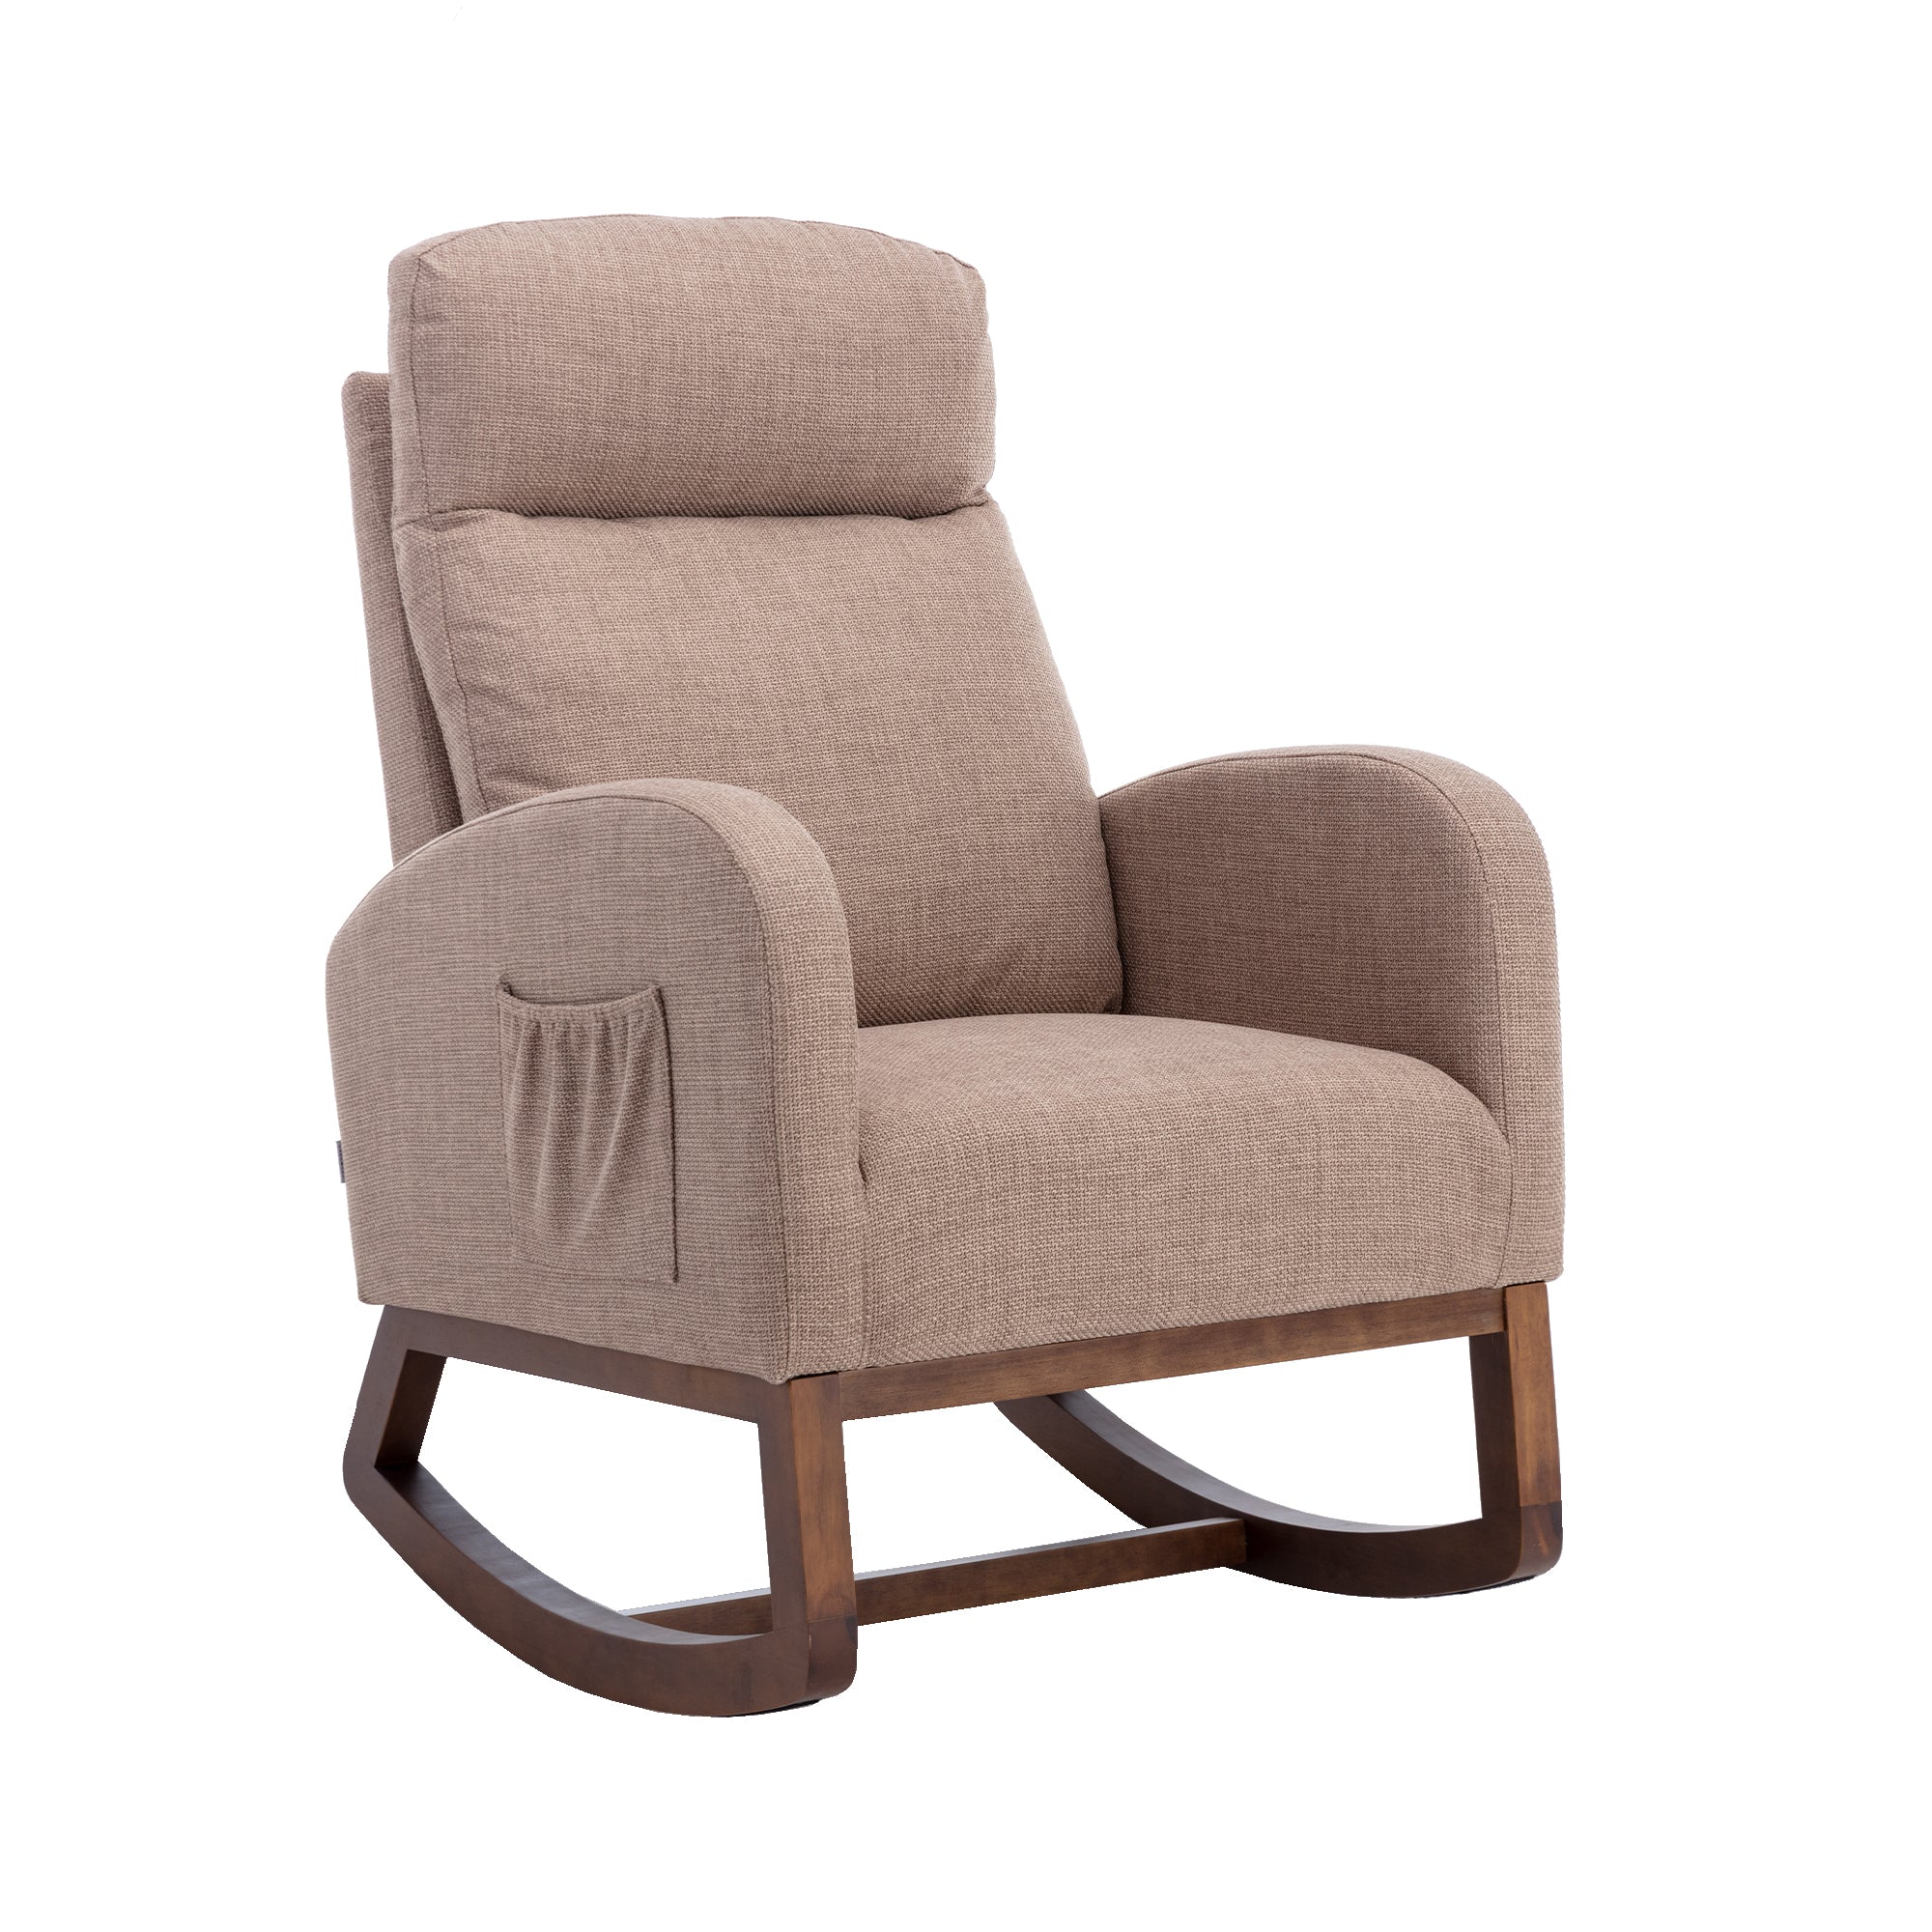 COOLMORE living room Comfortable rocking chair living camel-solid wood